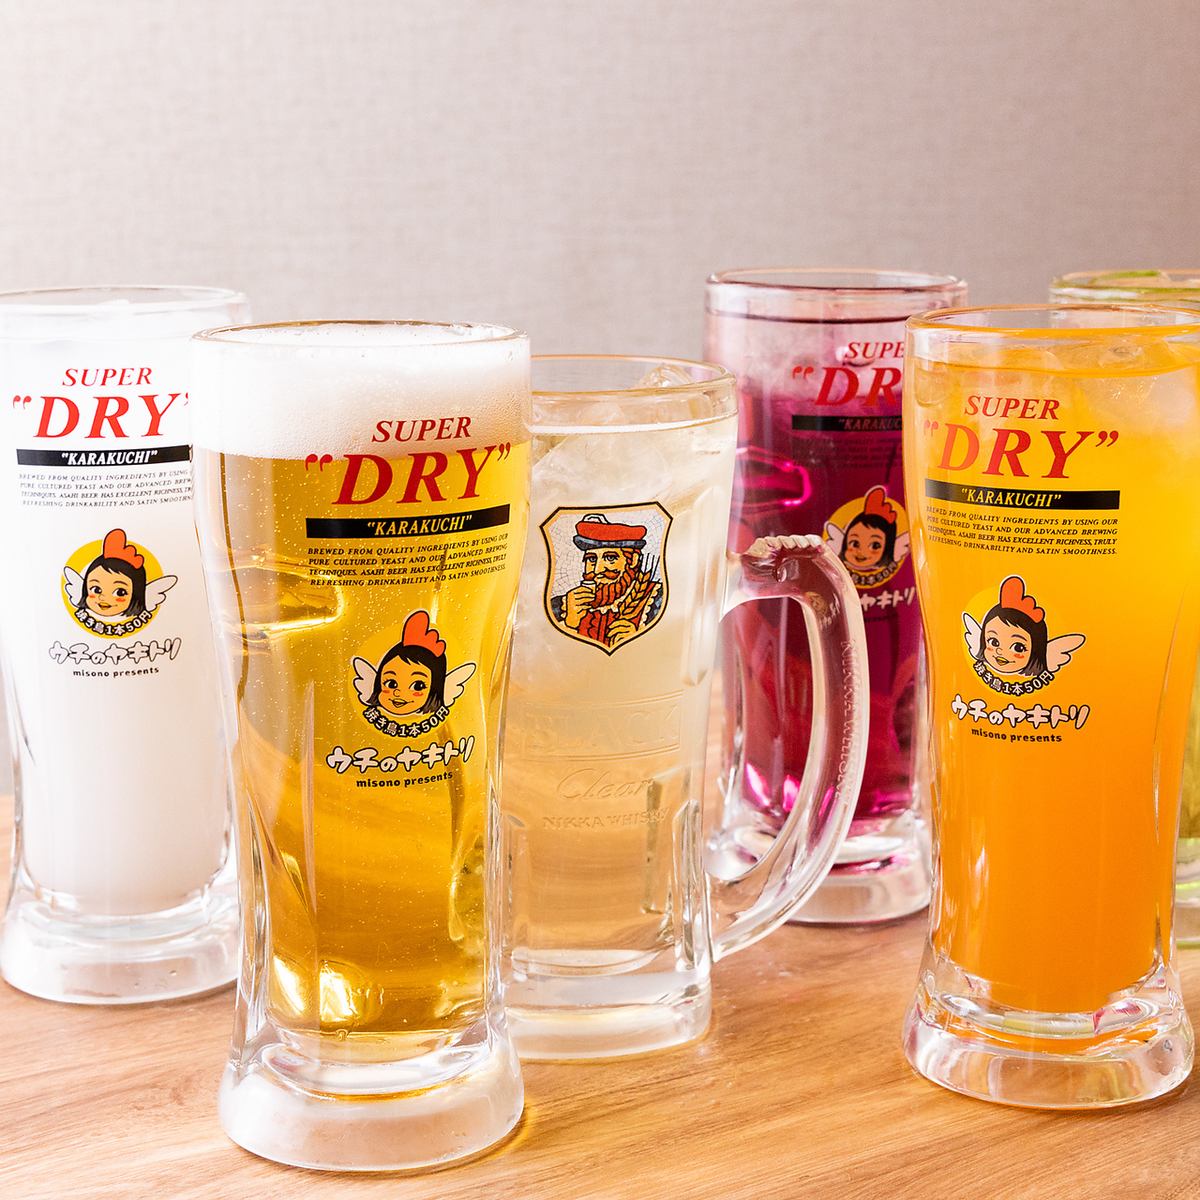 We have various all-you-can-drink courses starting from 3,500 yen! A generous 180 minutes!